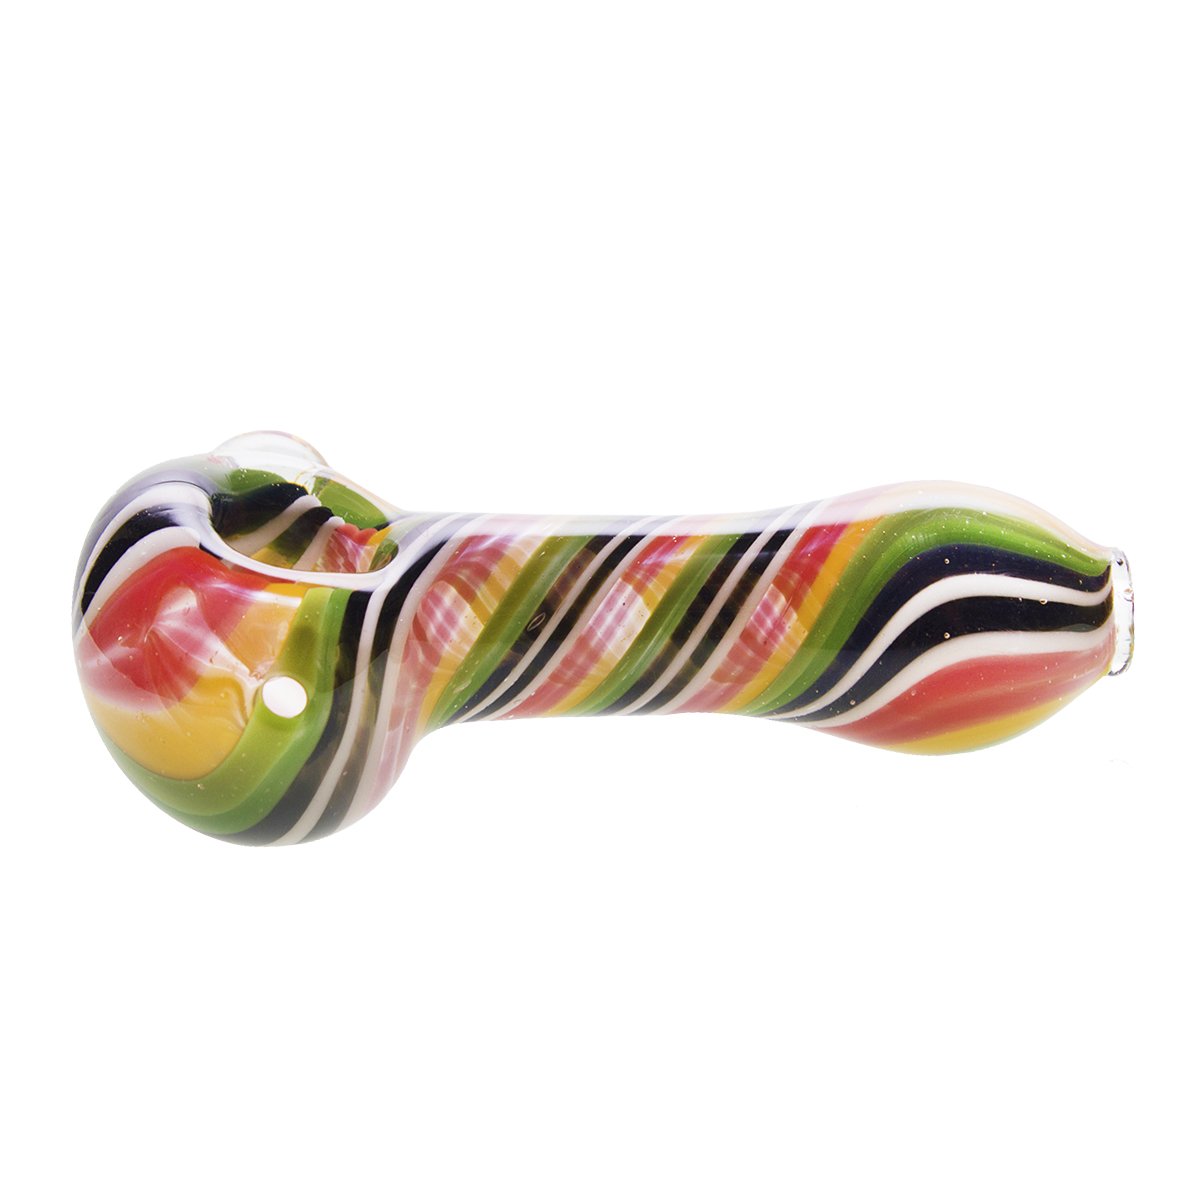 4 Thick Candy Cane Spoon Hand Pipes